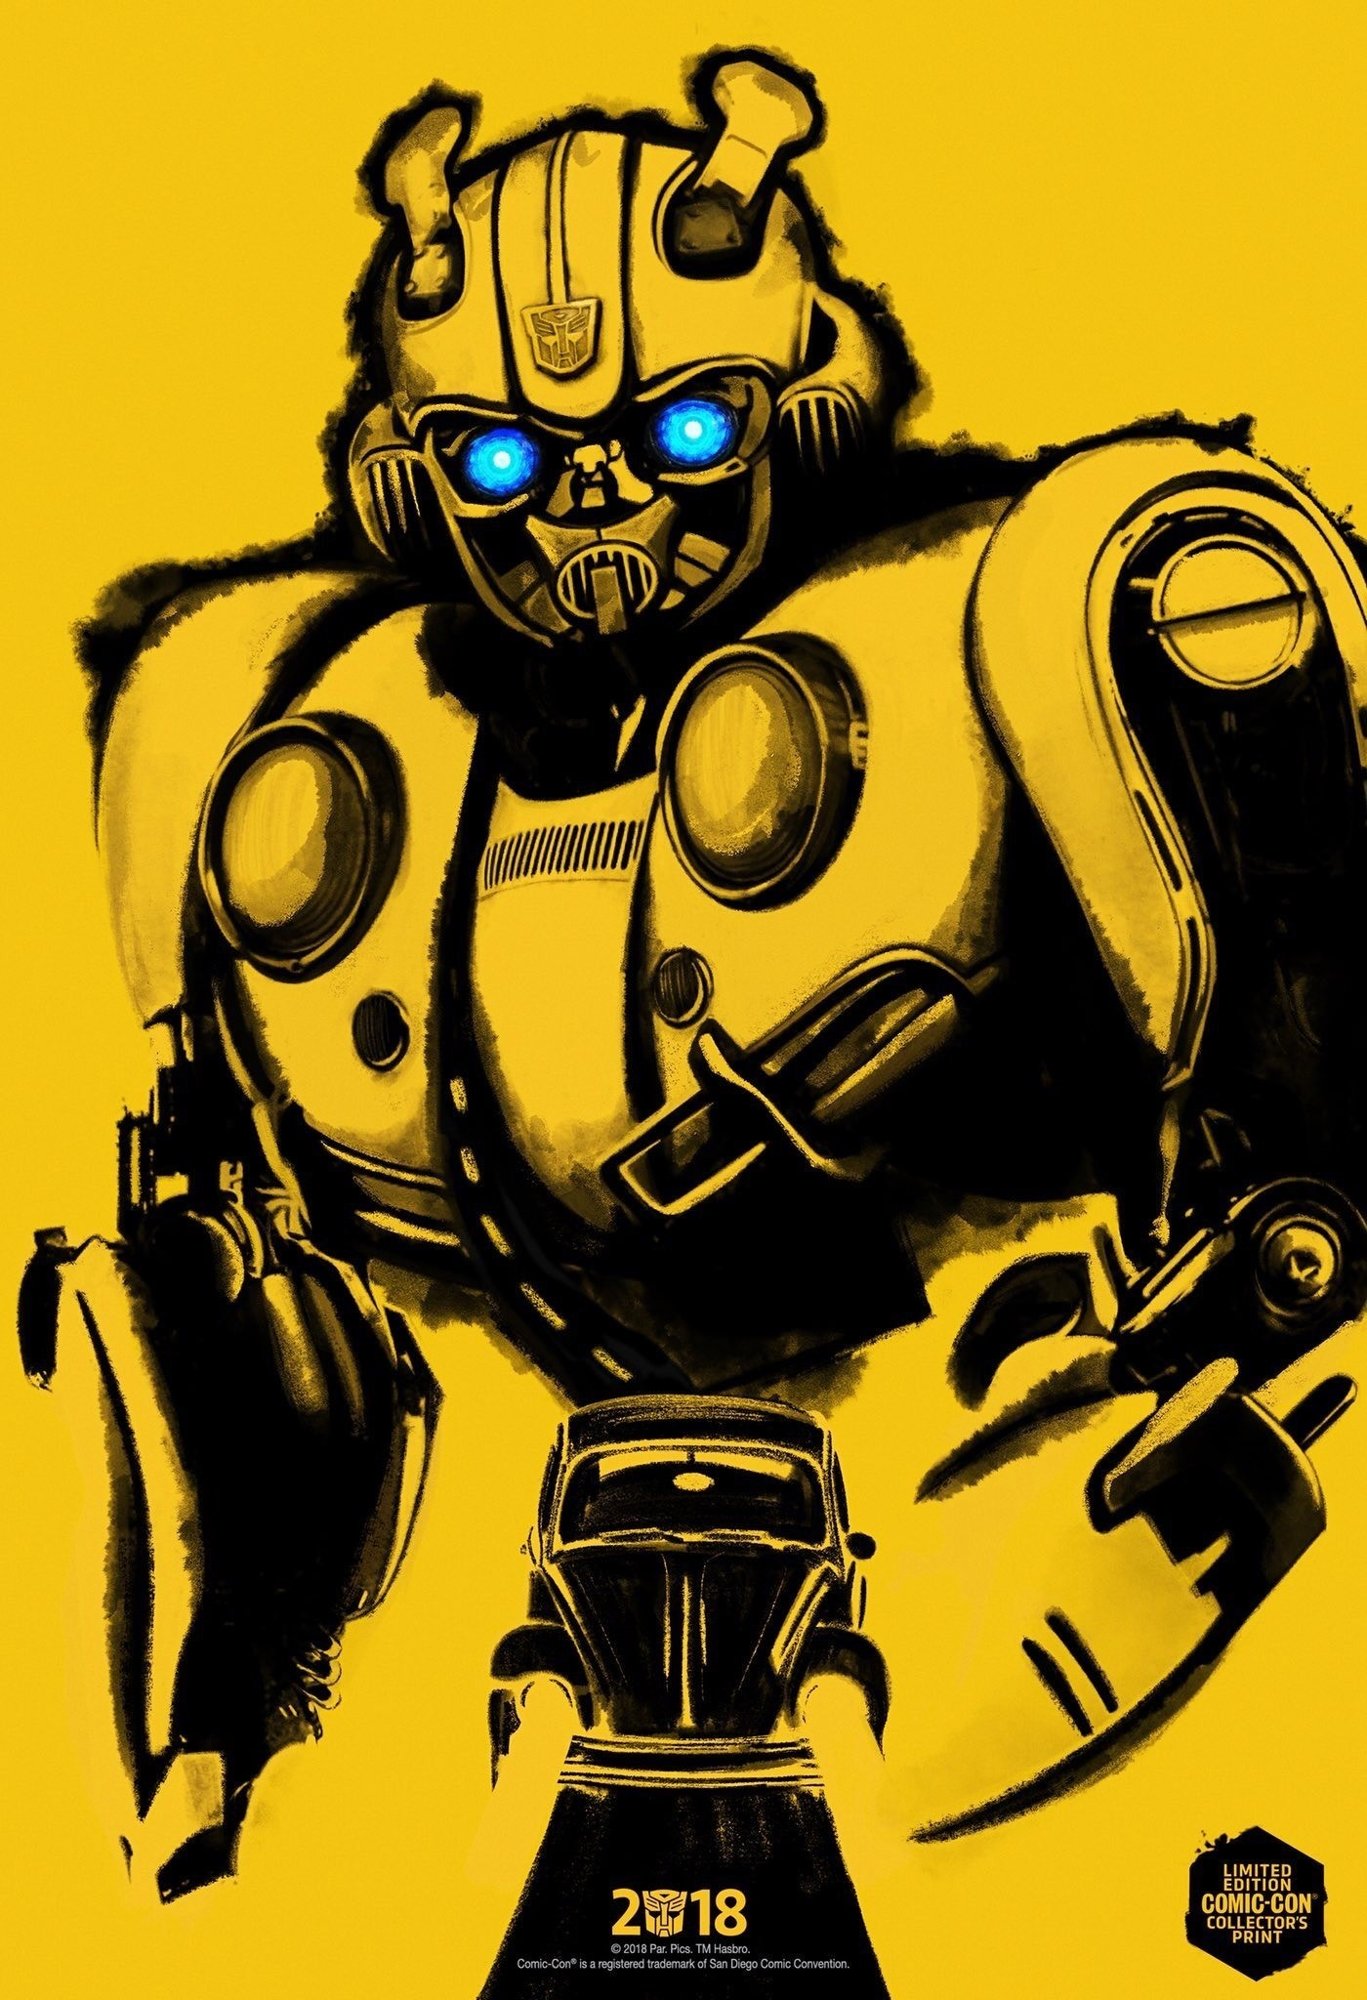 Poster of Paramount Pictures' Bumblebee (2018)